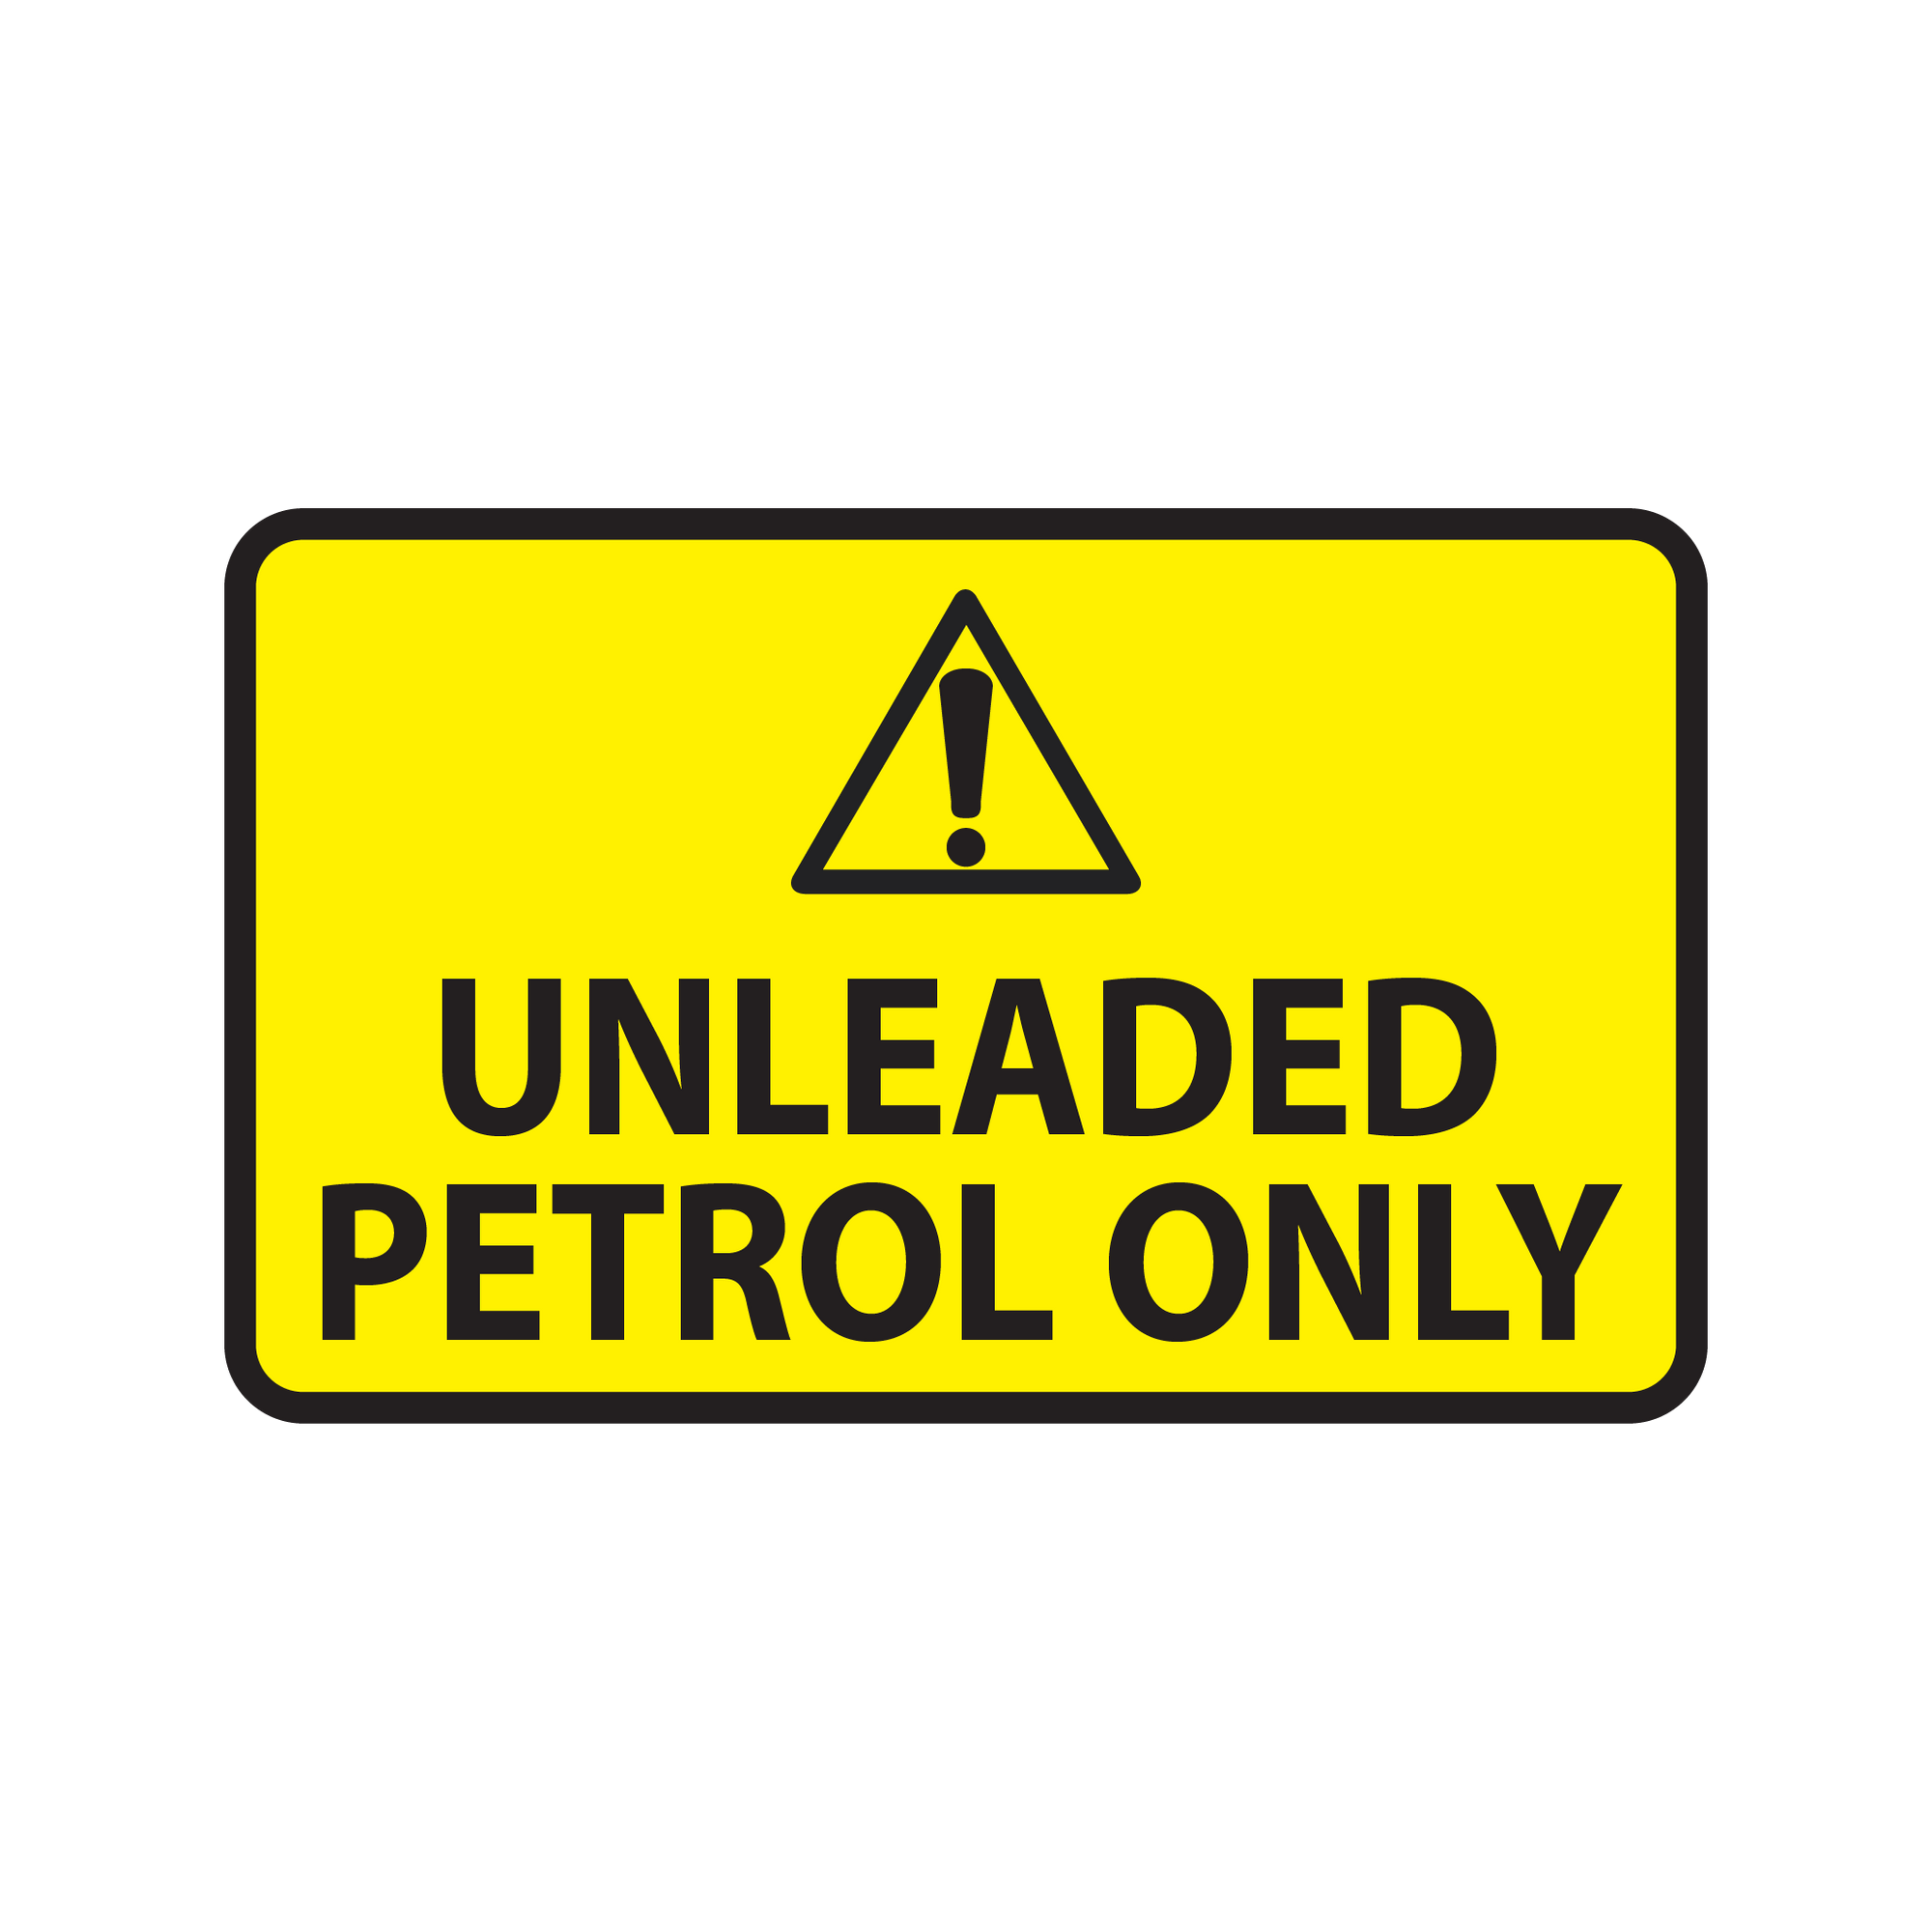 UNLEADED PETROL ONLY - S17